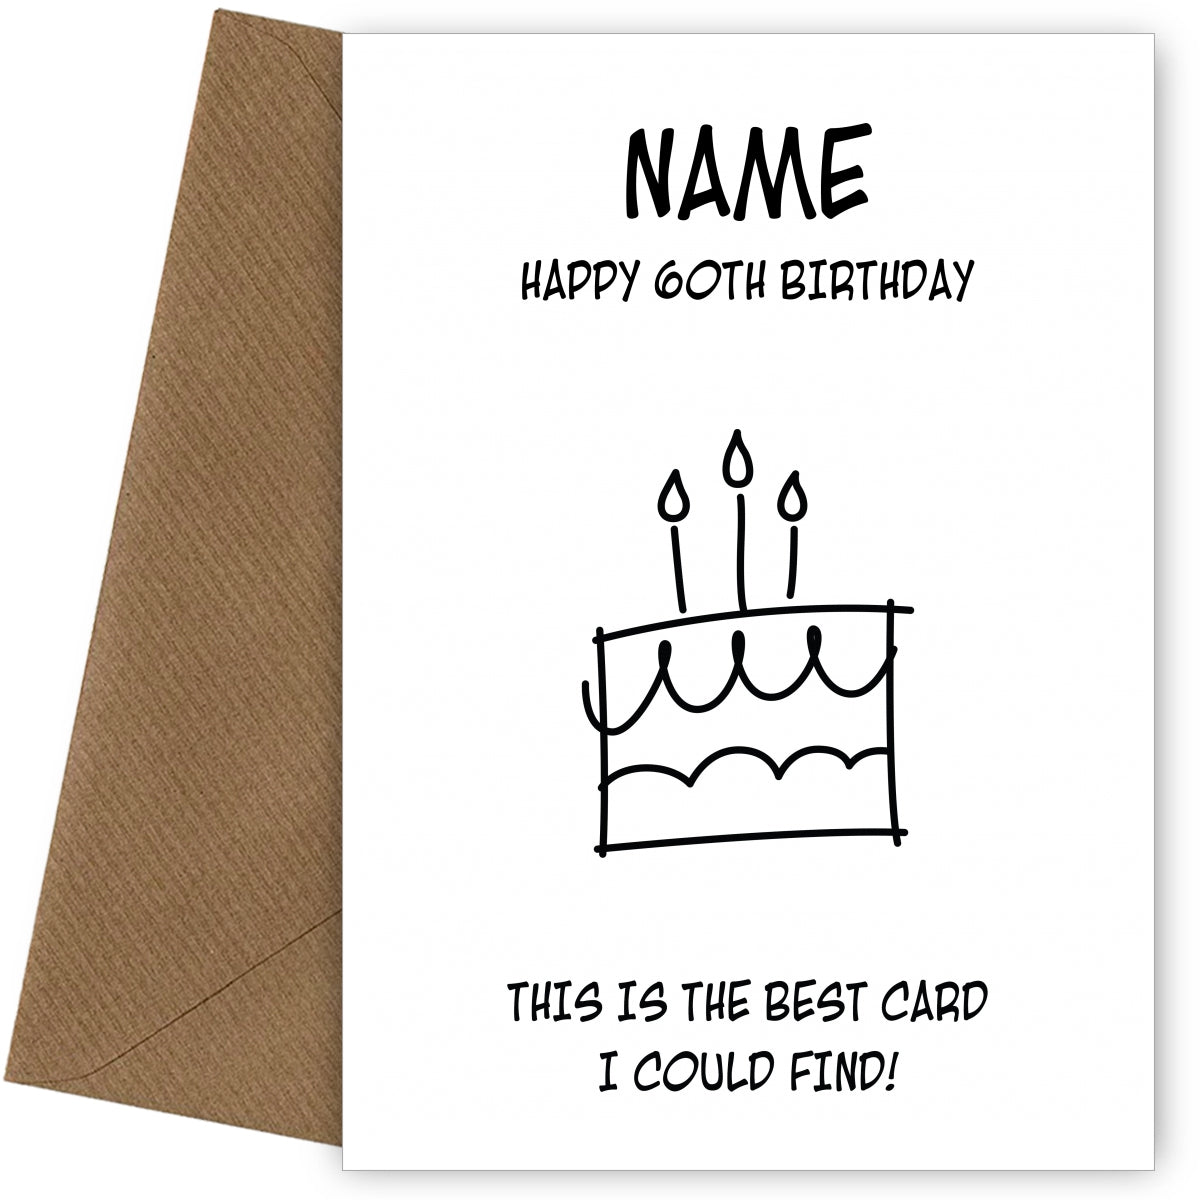 Happy 60th Birthday Card - Best Card I Could Find!